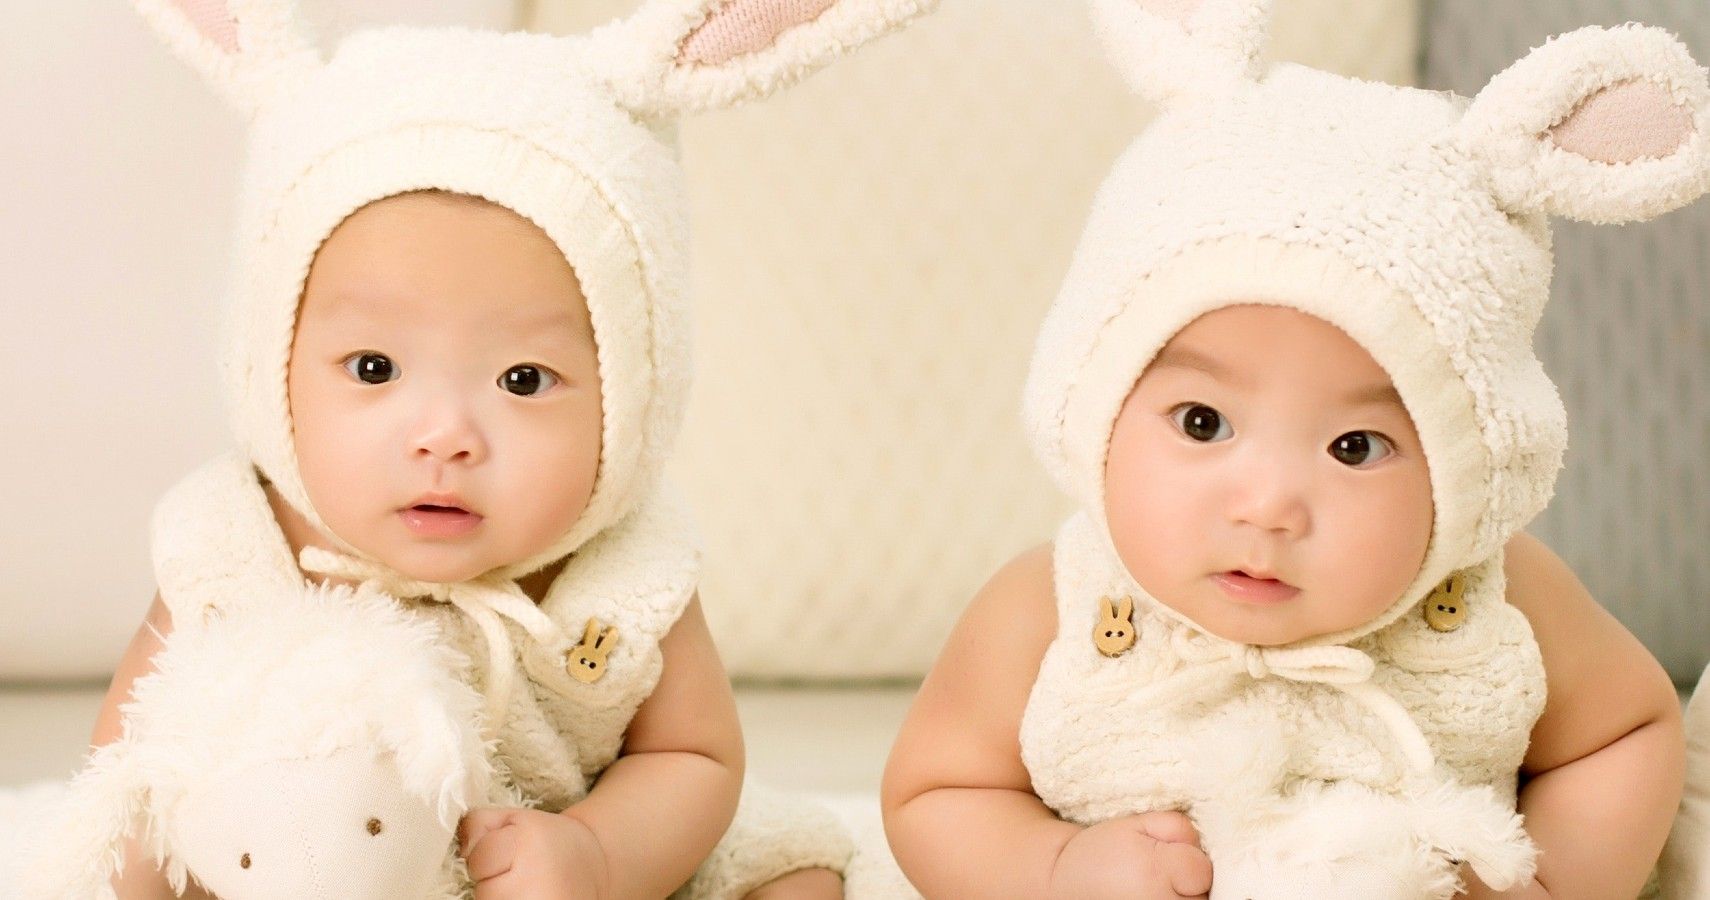 More Twins Are Being Born, Finds Research